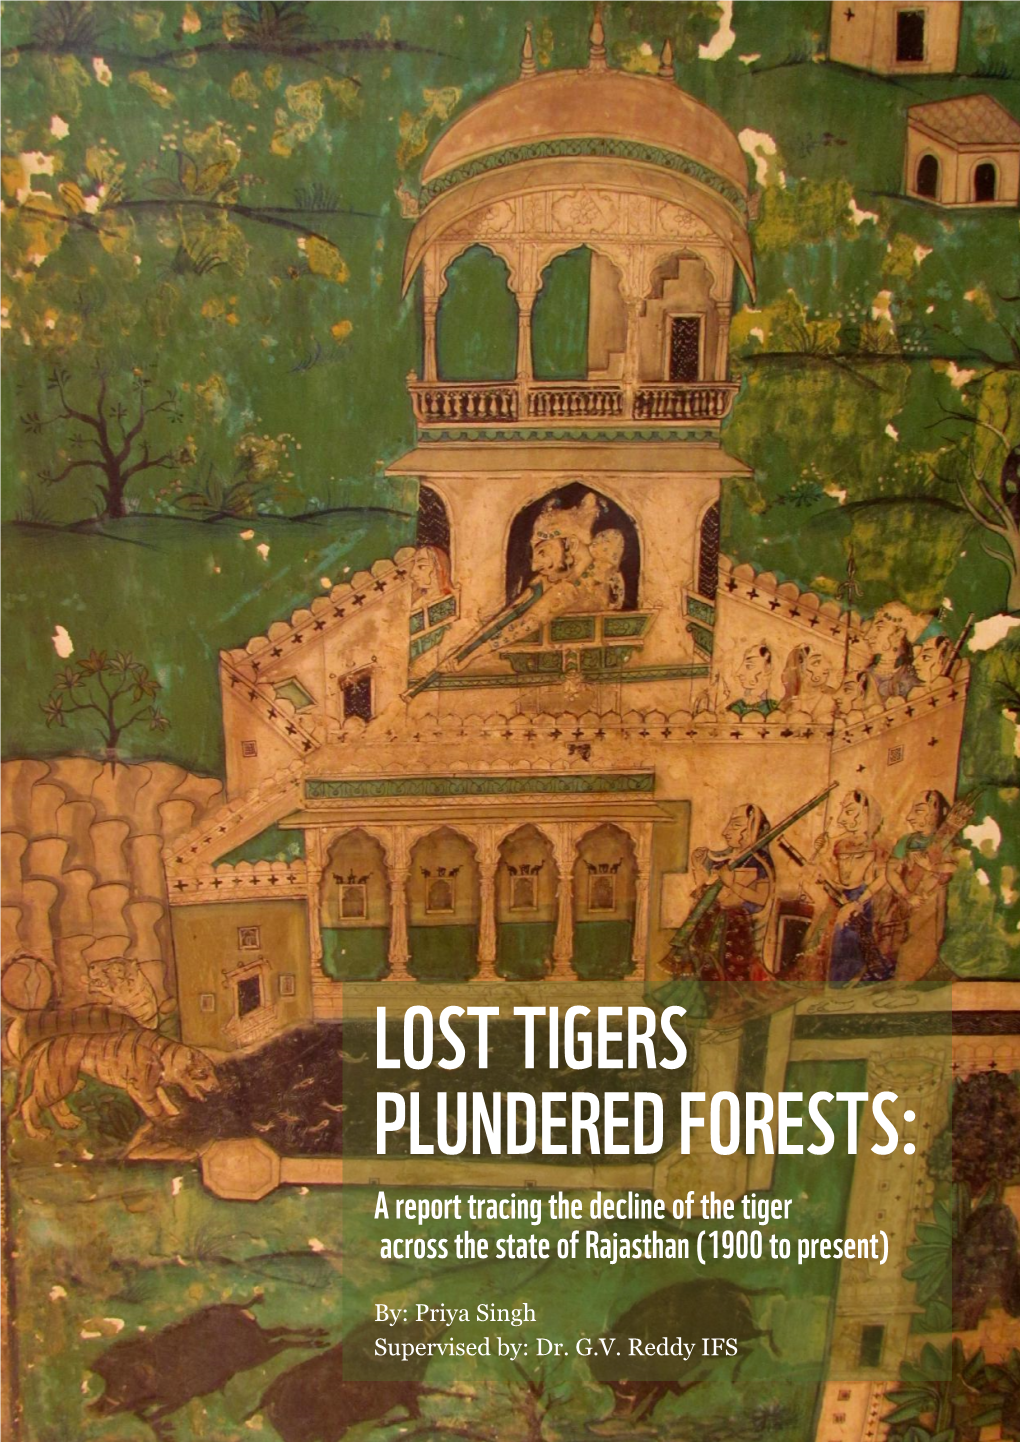 LOST TIGERS PLUNDERED FORESTS: a Report Tracing the Decline of the Tiger Across the State of Rajasthan (1900 to Present)